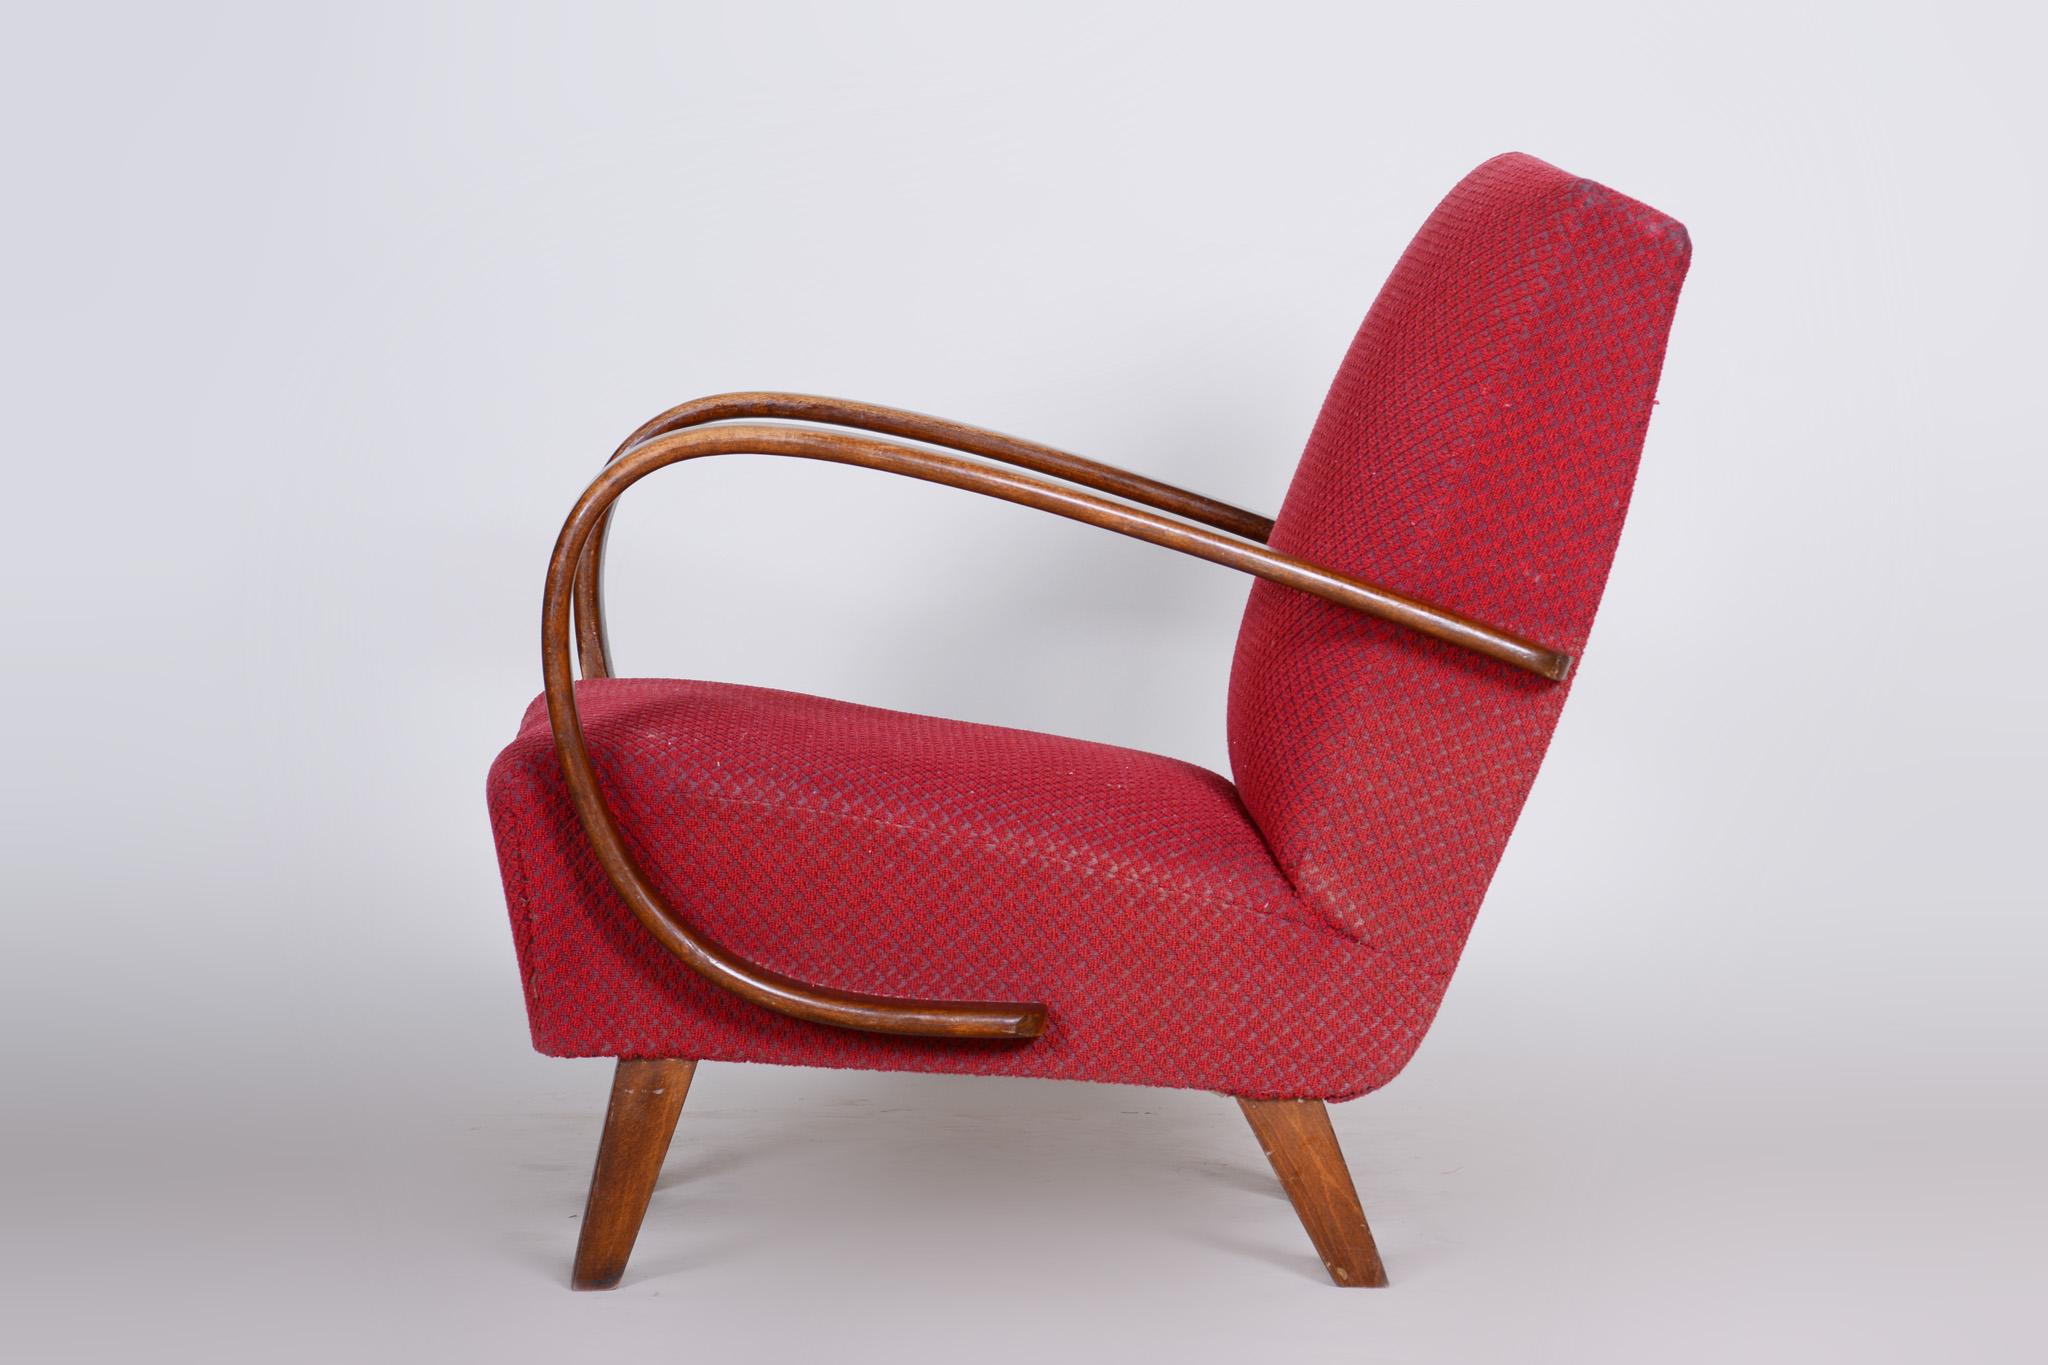 Fabric Red Armchair, Made in Czechia, 1930s, Original Condition, Art Deco Style For Sale